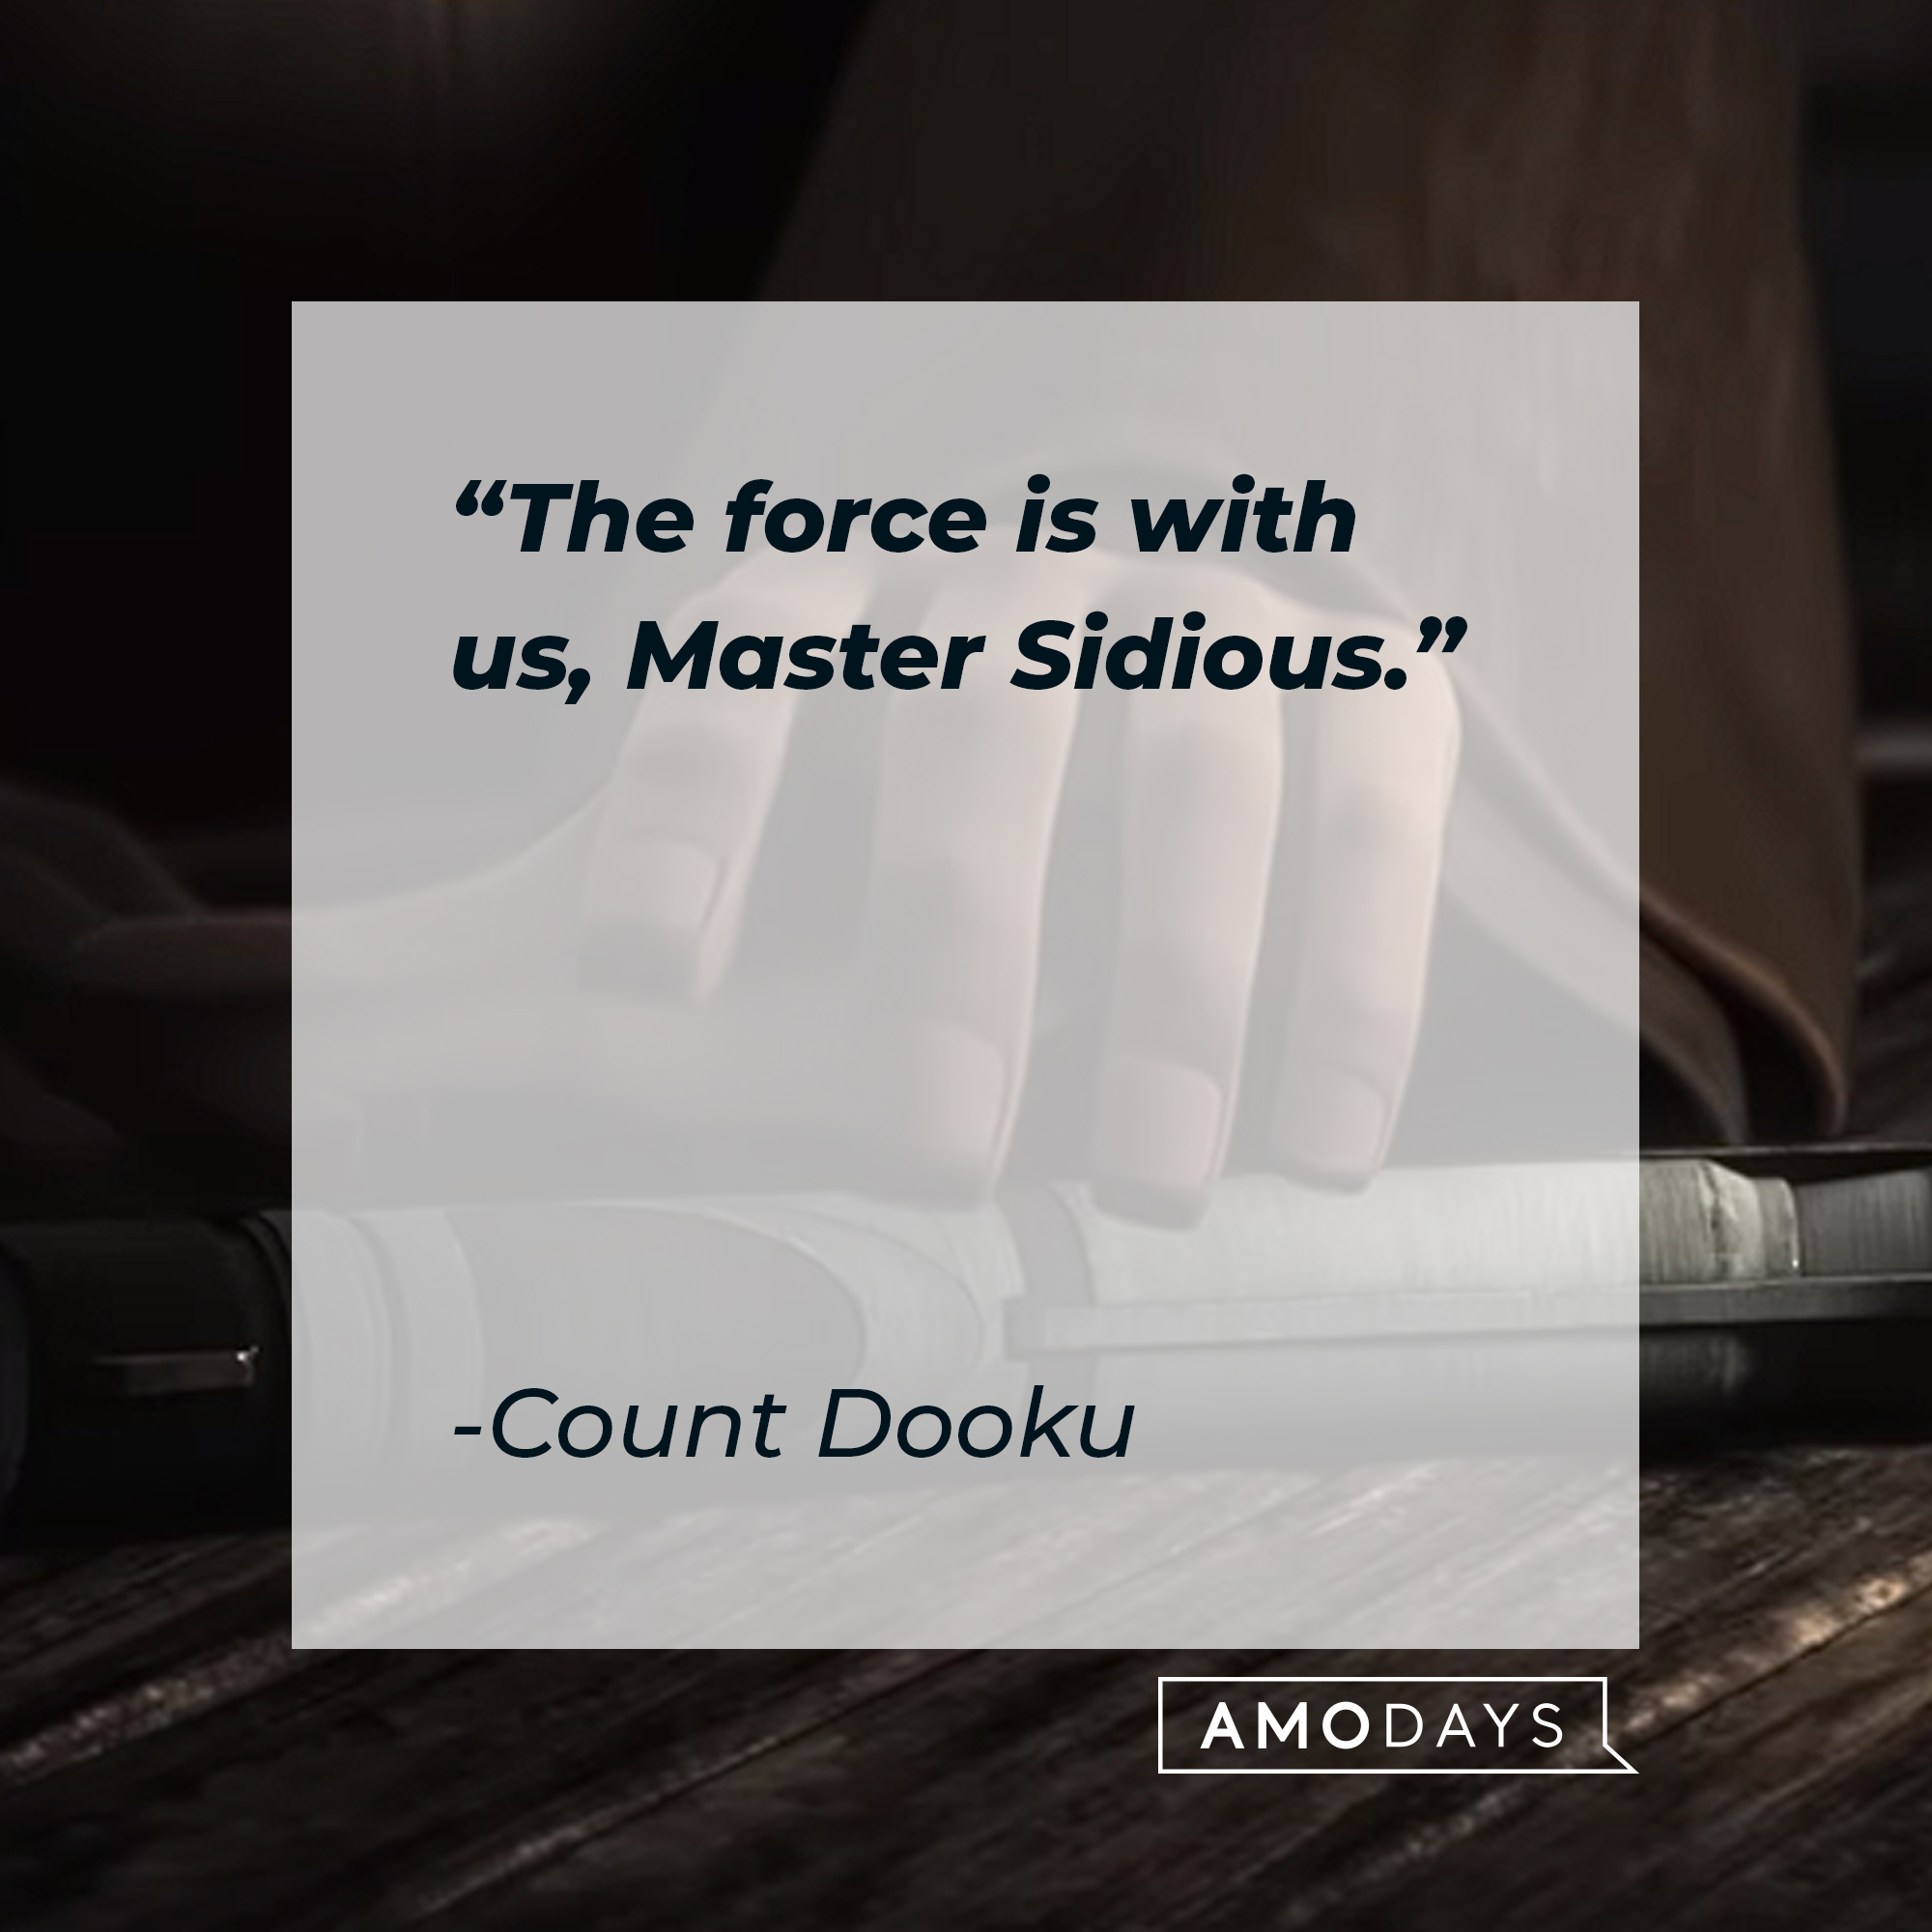 Count Dooku's quote: "The force is with us, Master Sidious." | Source: youtube.com/StarWars